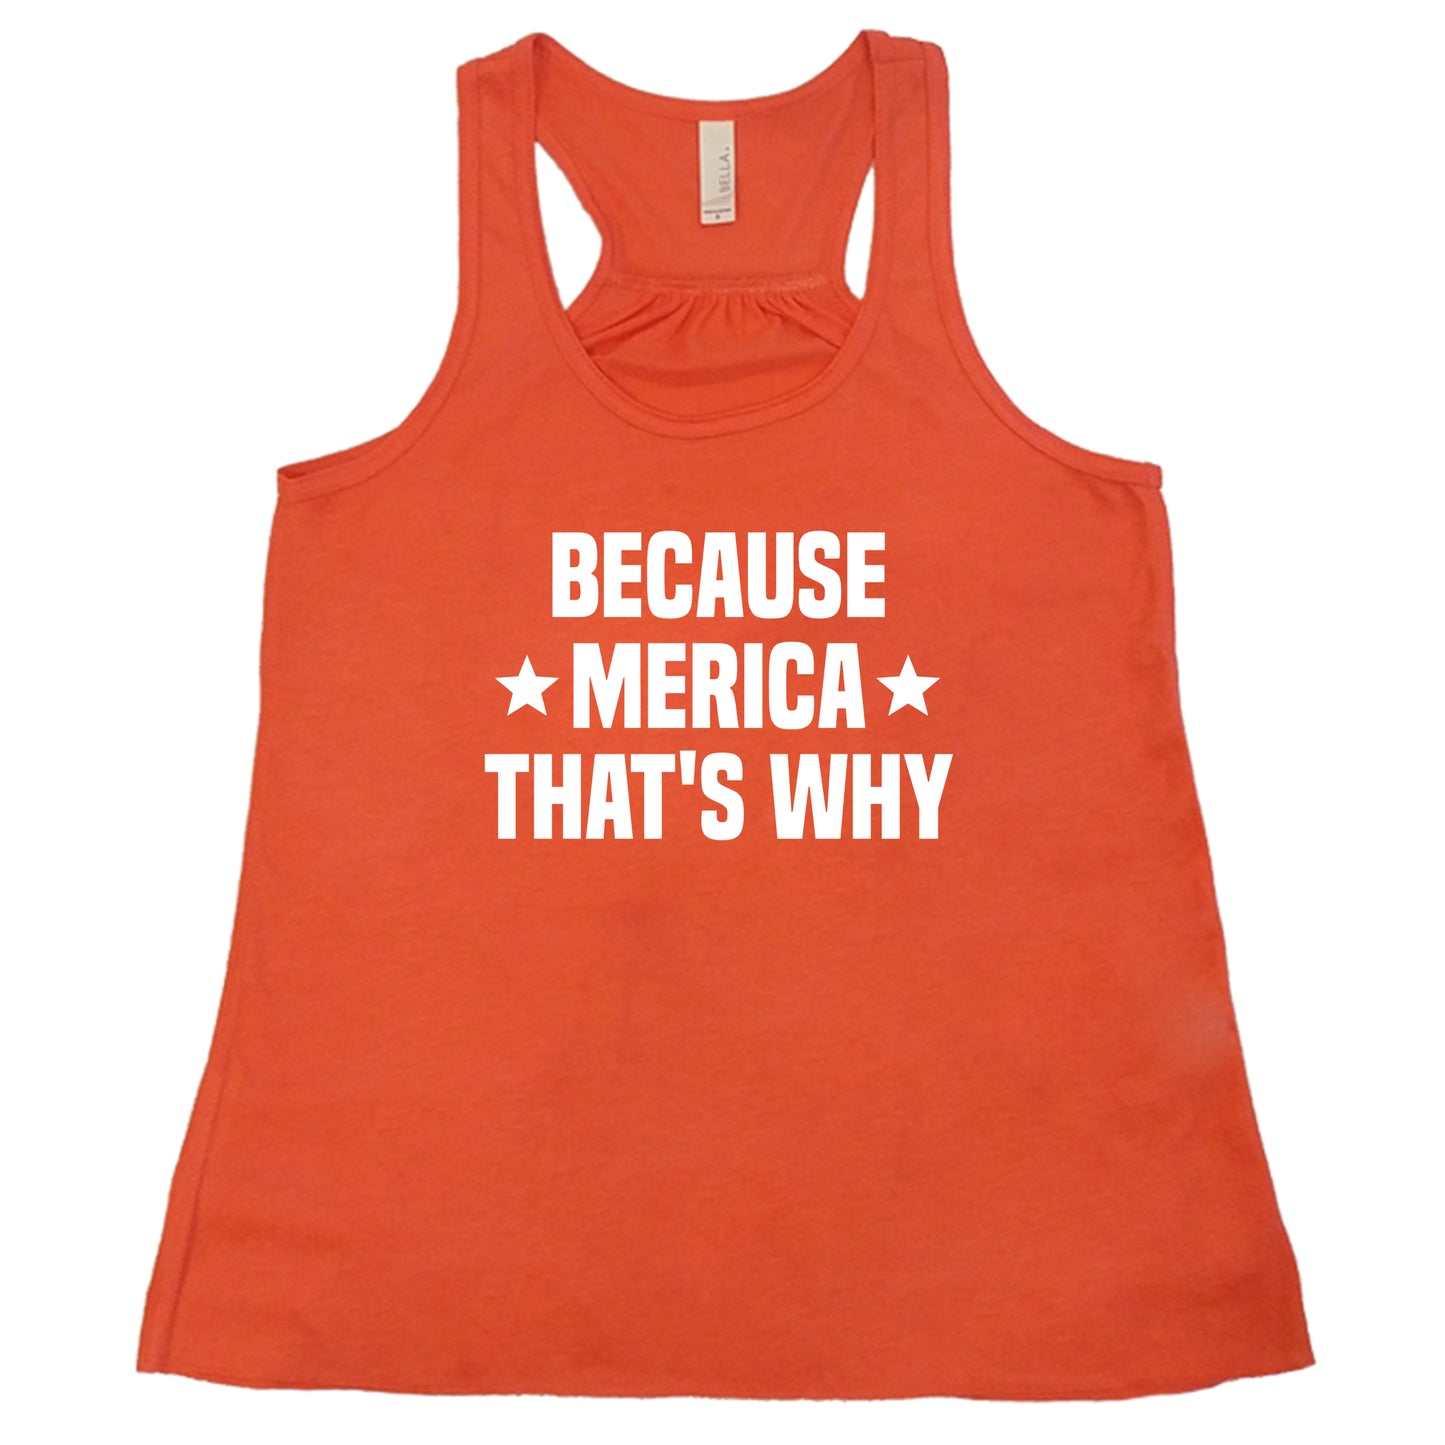 Because Merica That's Why Shirt